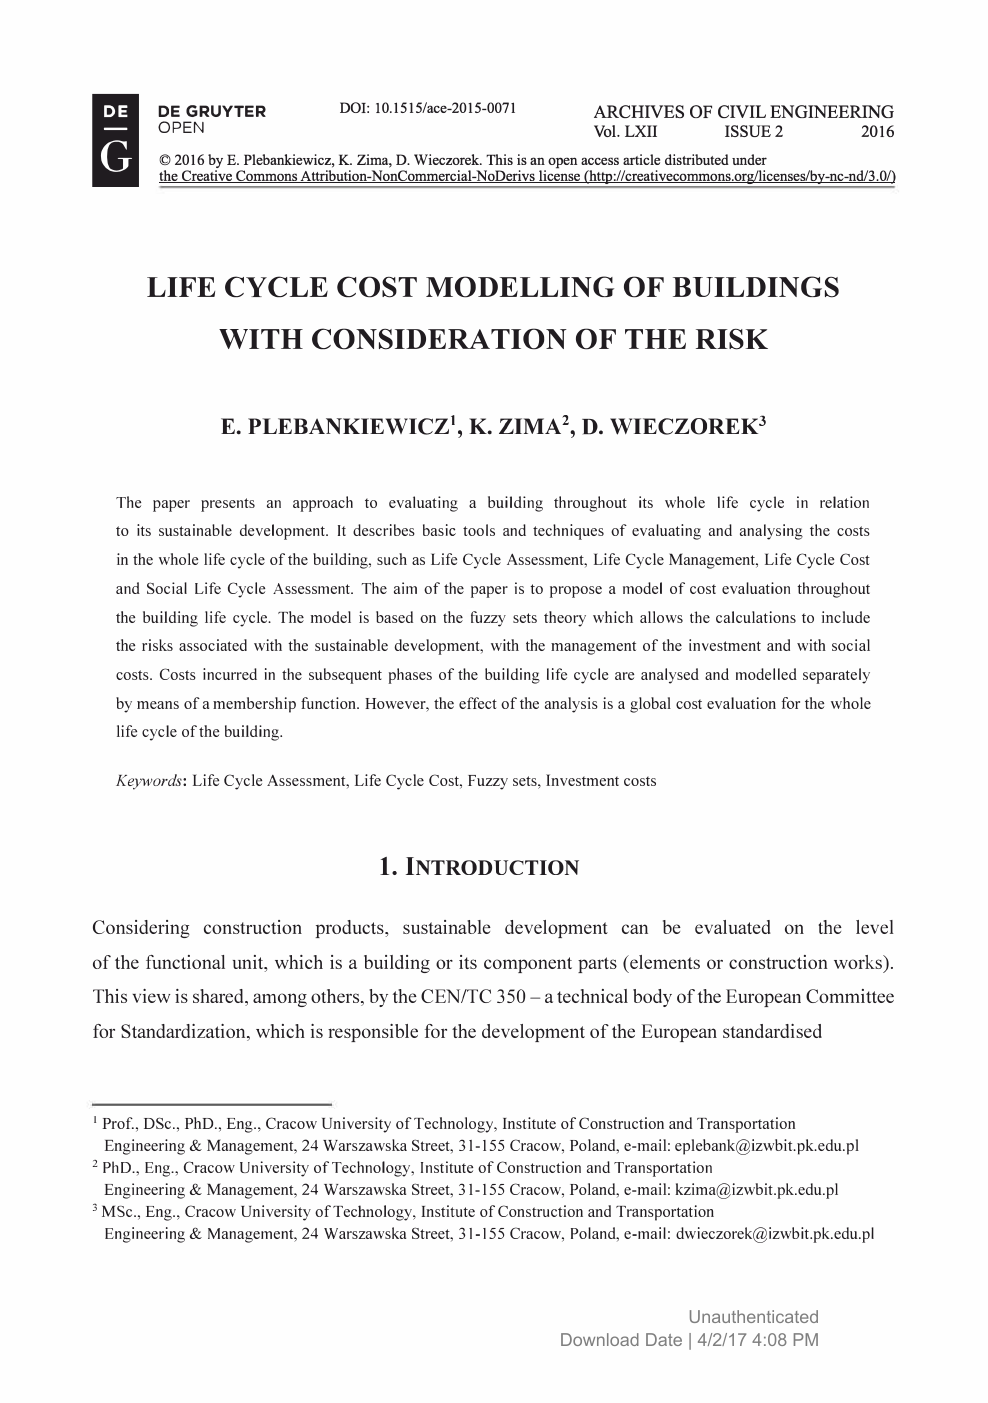 Life Cycle Cost Modelling Of Buildings With Consideration Of The Risk Topic Of Research Paper In Civil Engineering Download Scholarly Article Pdf And Read For Free On Cyberleninka Open Science Hub